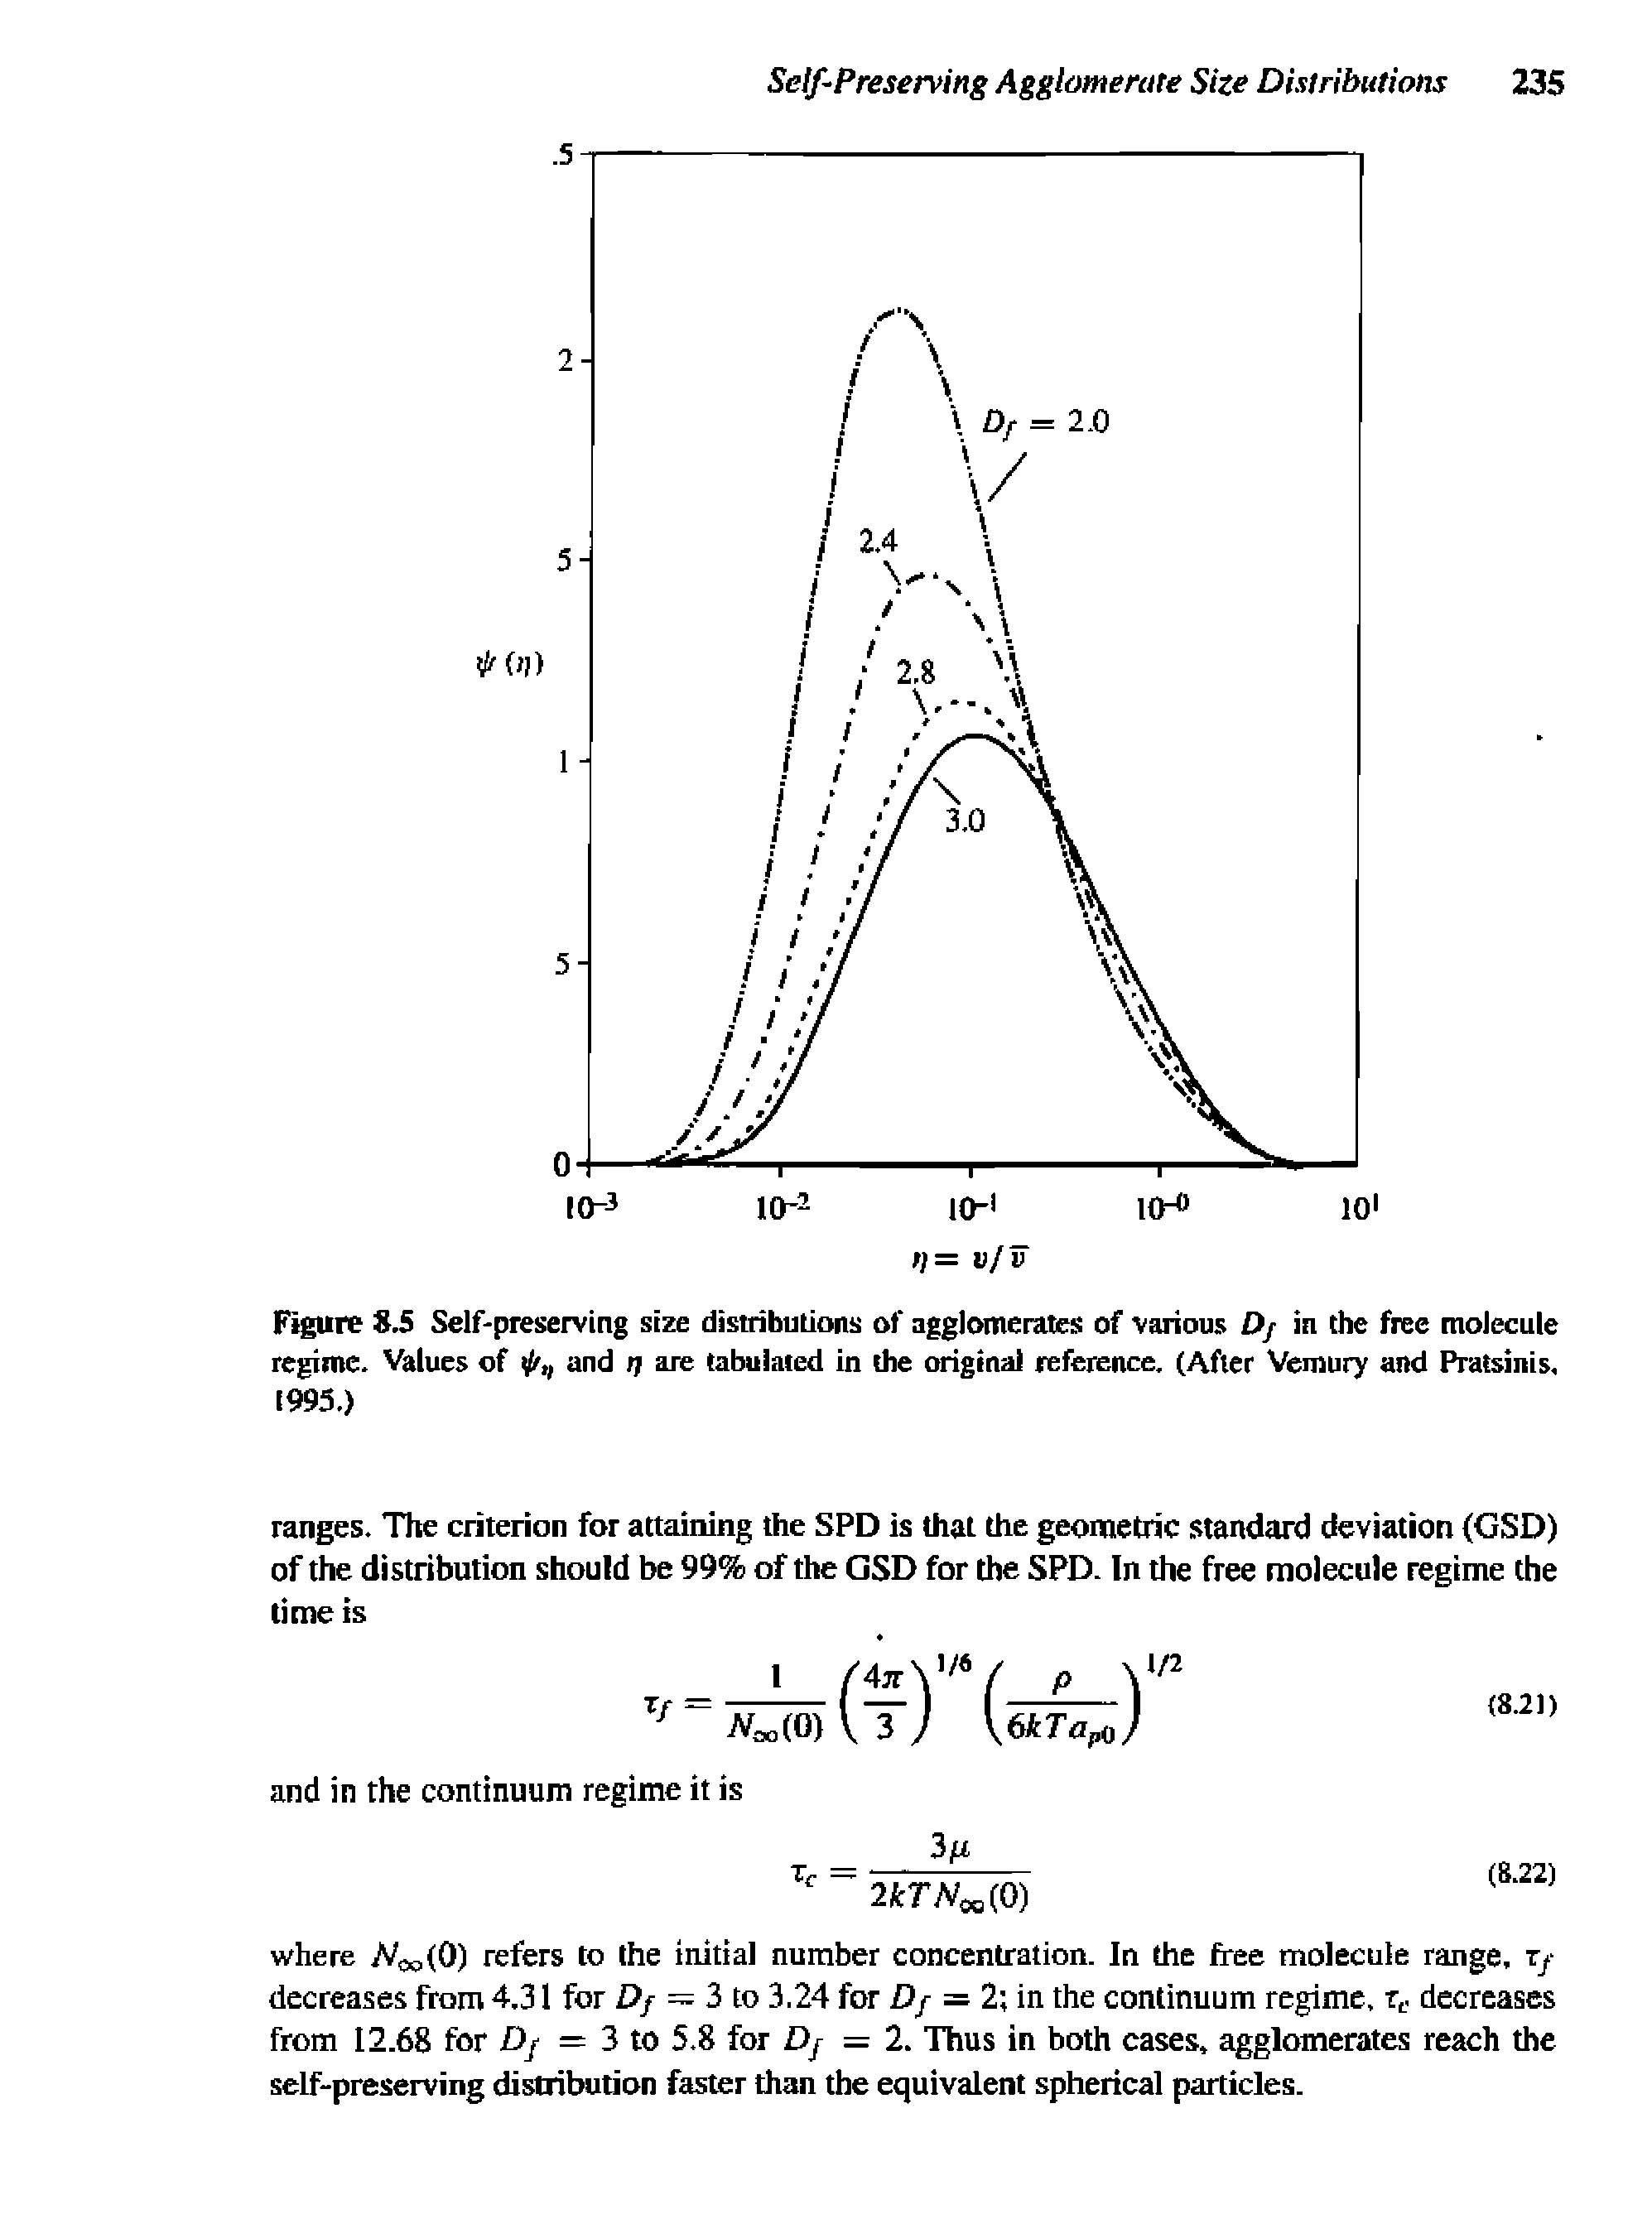 Figure 8.5 Self-preserving size distributions of agglomerates of various D/ in the free molecule regime. Values of ij/, and tj are tabulated in the original reference. (After Vemury and Pratsinis, 1995.)...